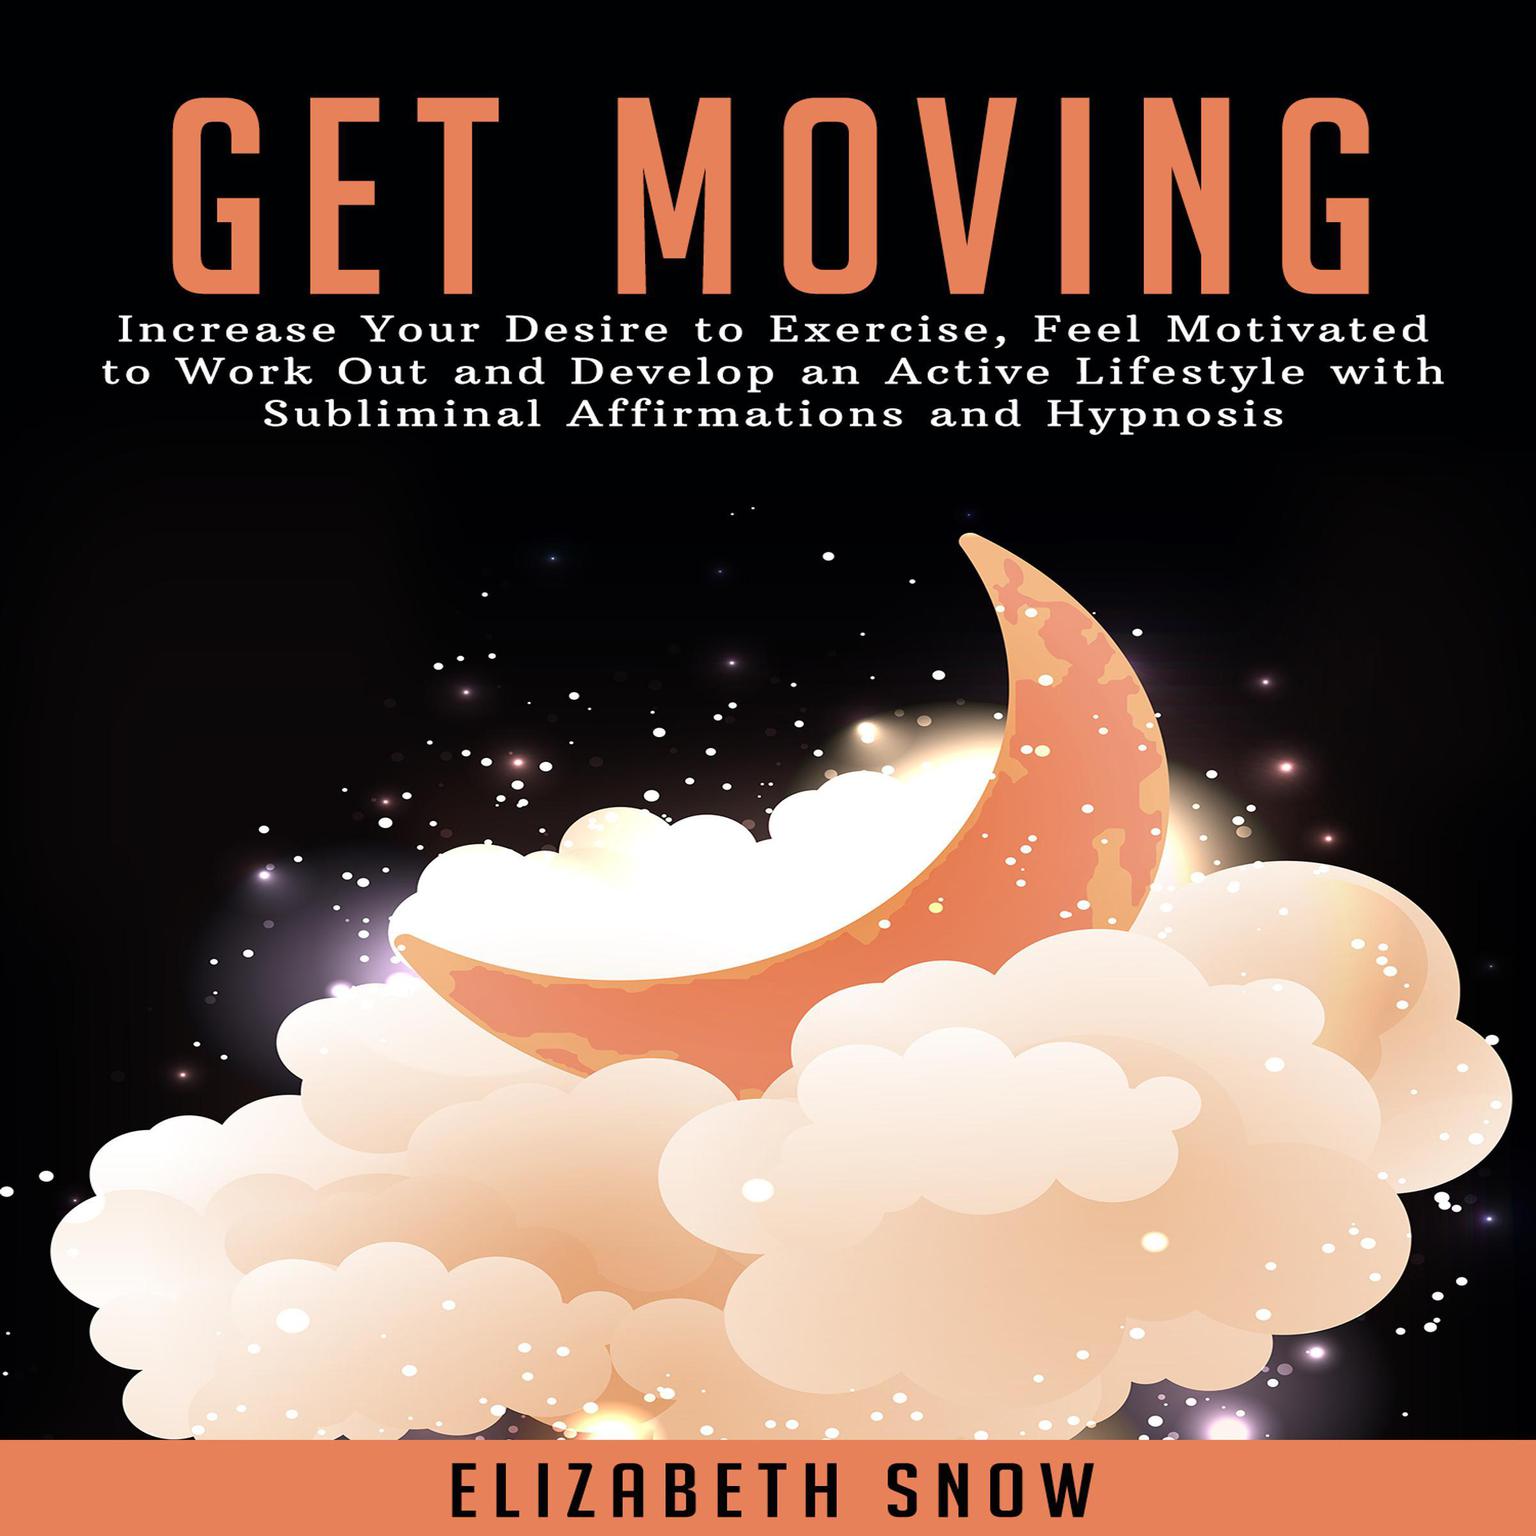 Get Moving: Increase Your Desire to Exercise, Feel Motivated to Work Out and Develop an Active Lifestyle with Subliminal Affirmations and Hypnosis Audiobook, by Elizabeth Snow